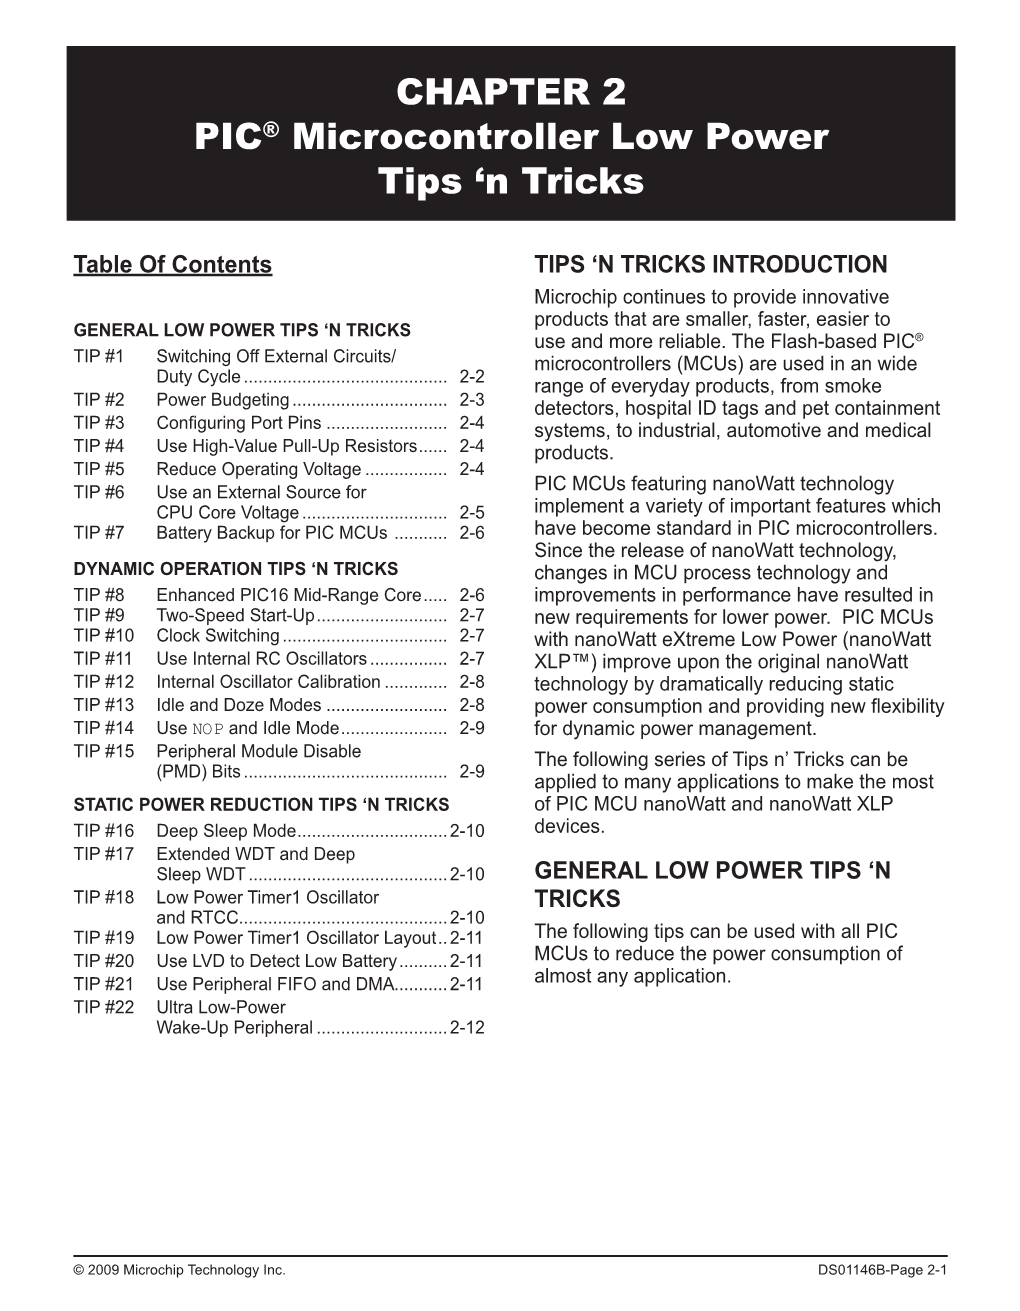 CHAPTER 2 PIC® Microcontroller Low Power Tips 'N Tricks